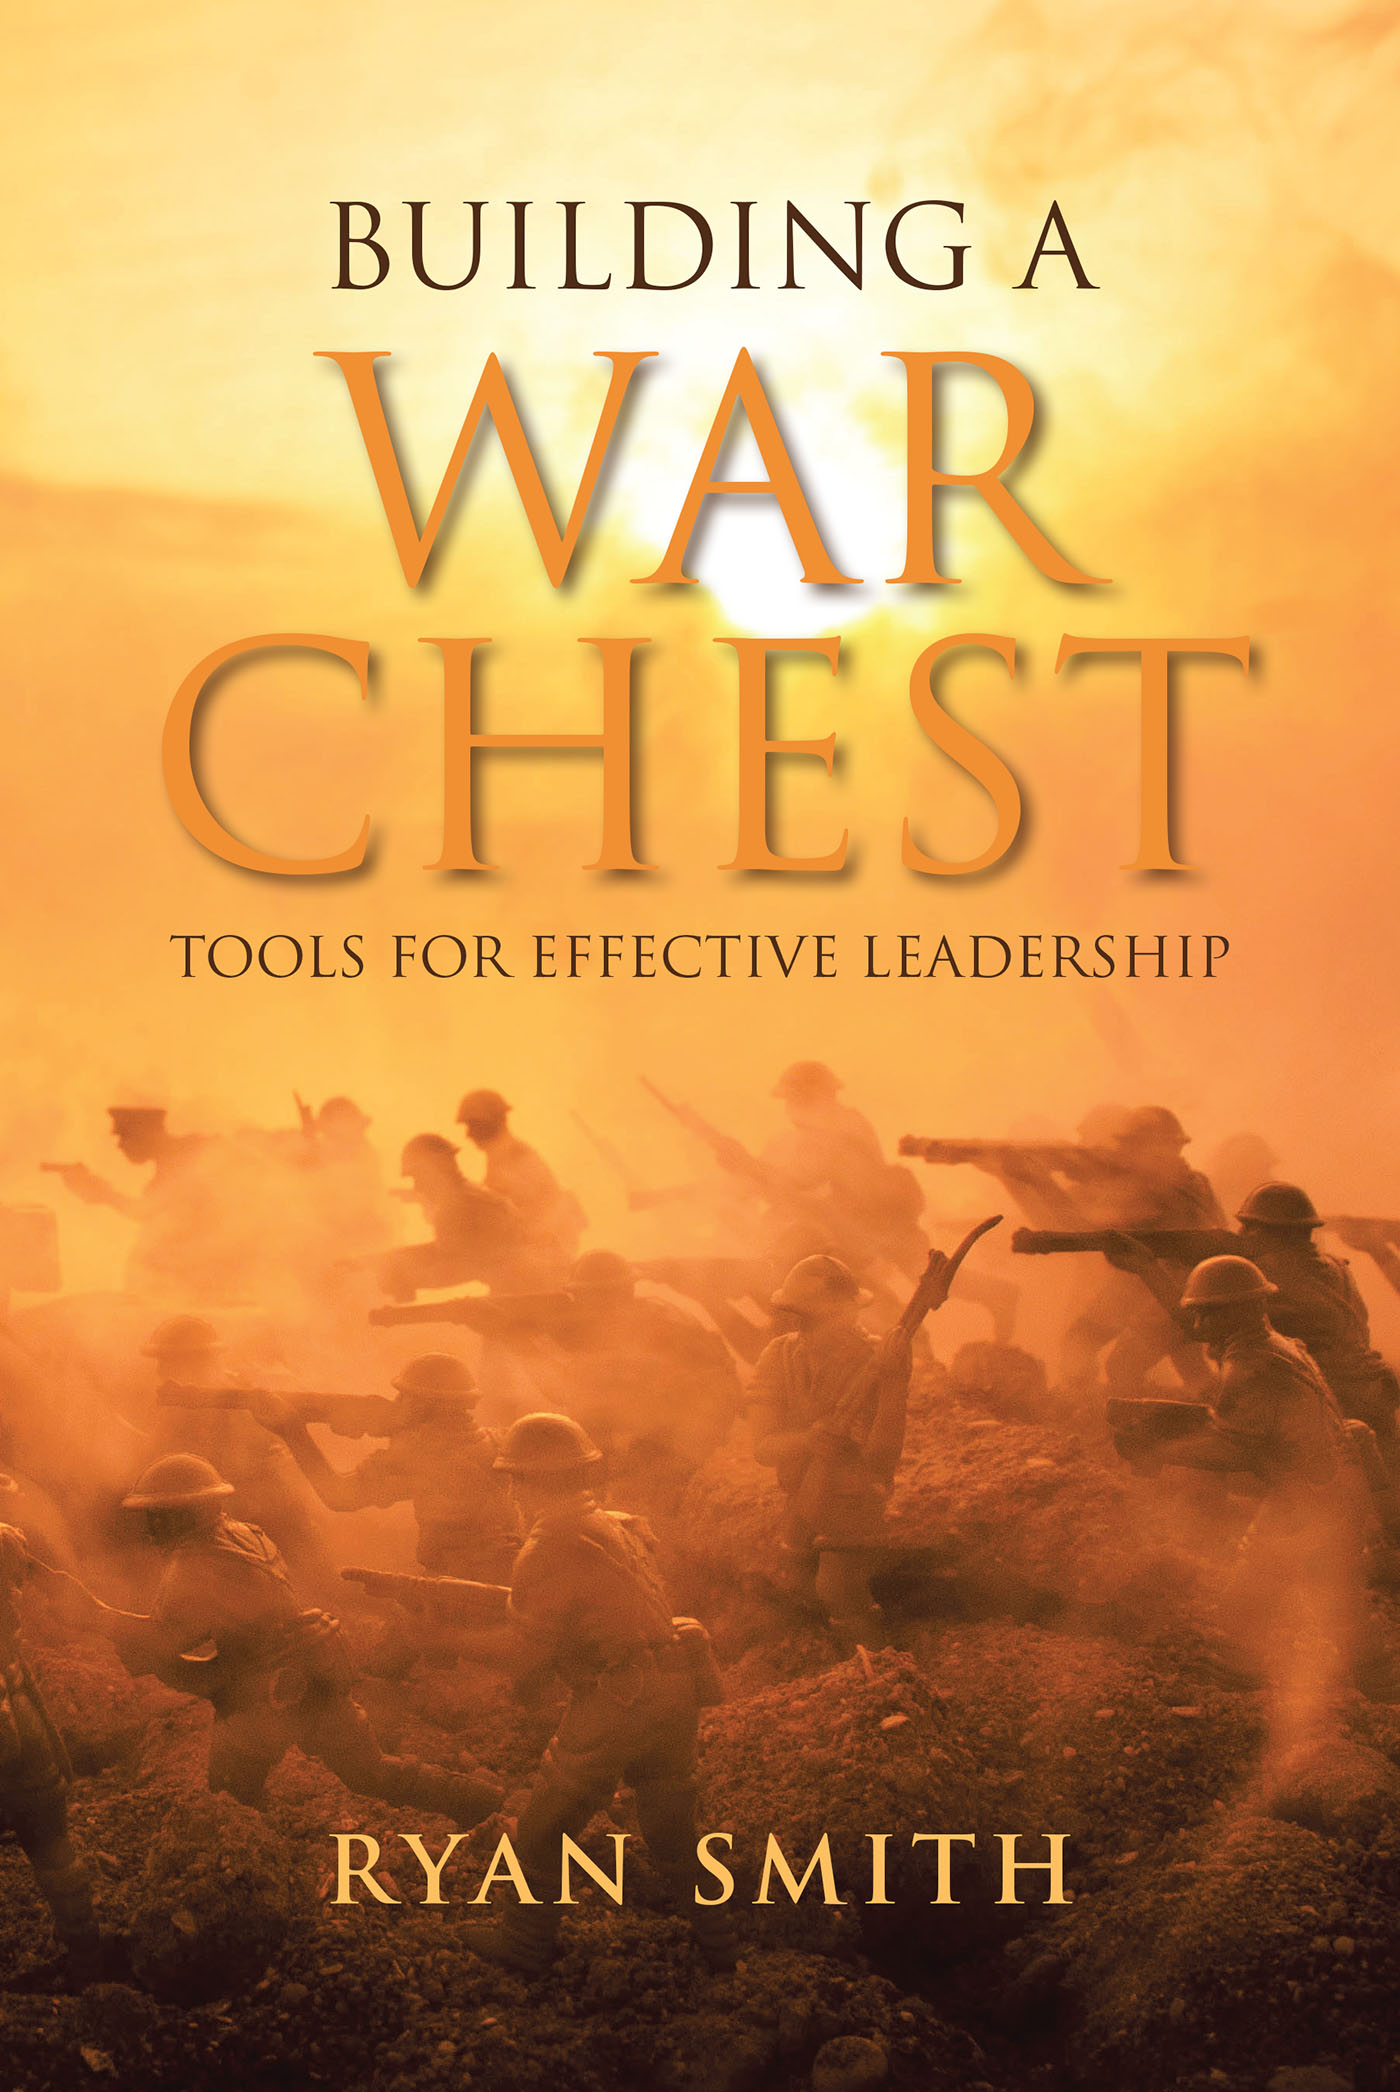 Author Ryan Smith’s New Book, "Building a War Chest," Explores the Tools Required for Readers to Become Effective Leaders in All Different Kinds of Settings